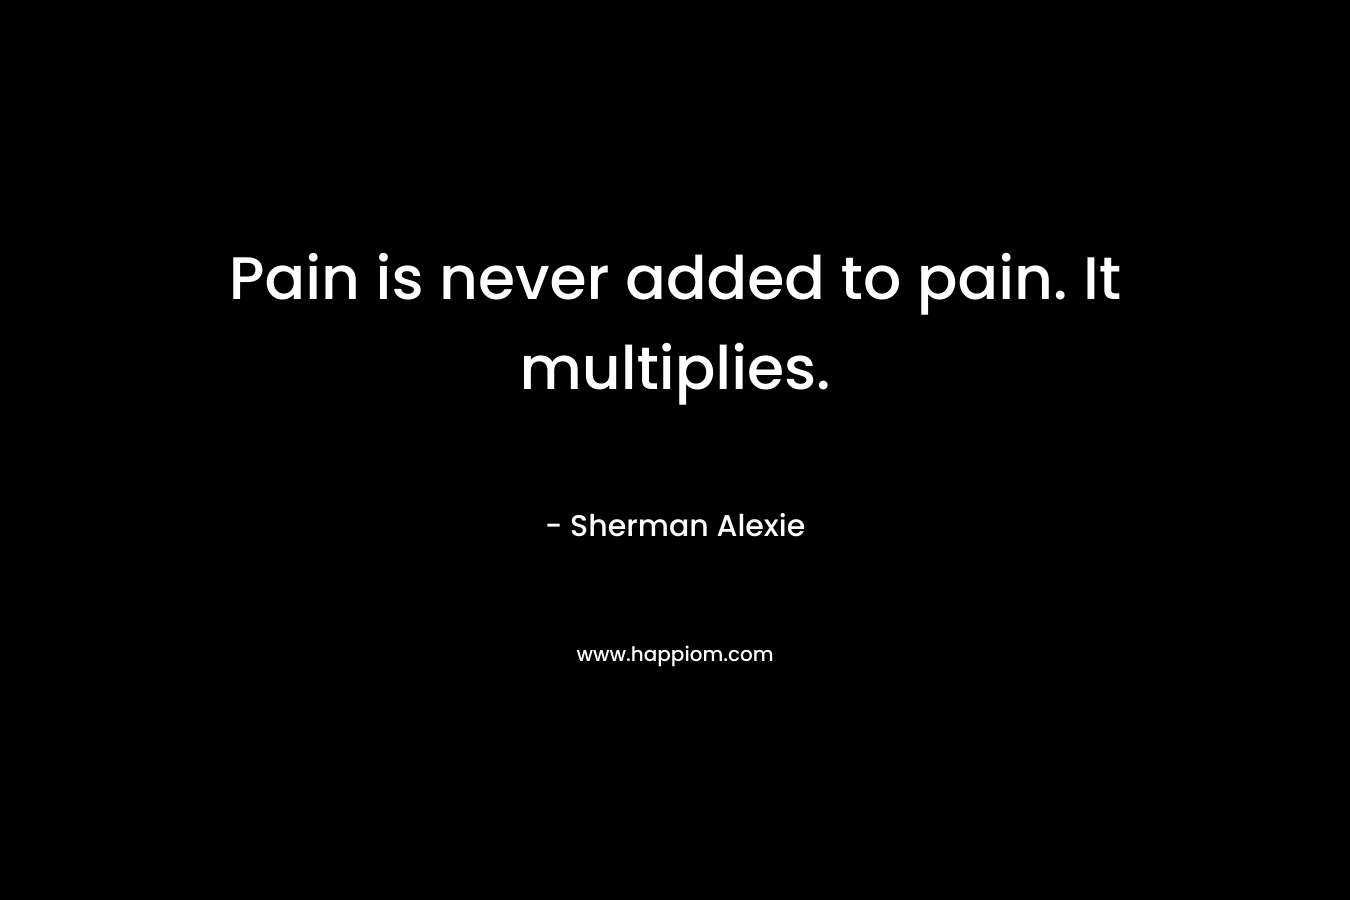 Pain is never added to pain. It multiplies. – Sherman Alexie